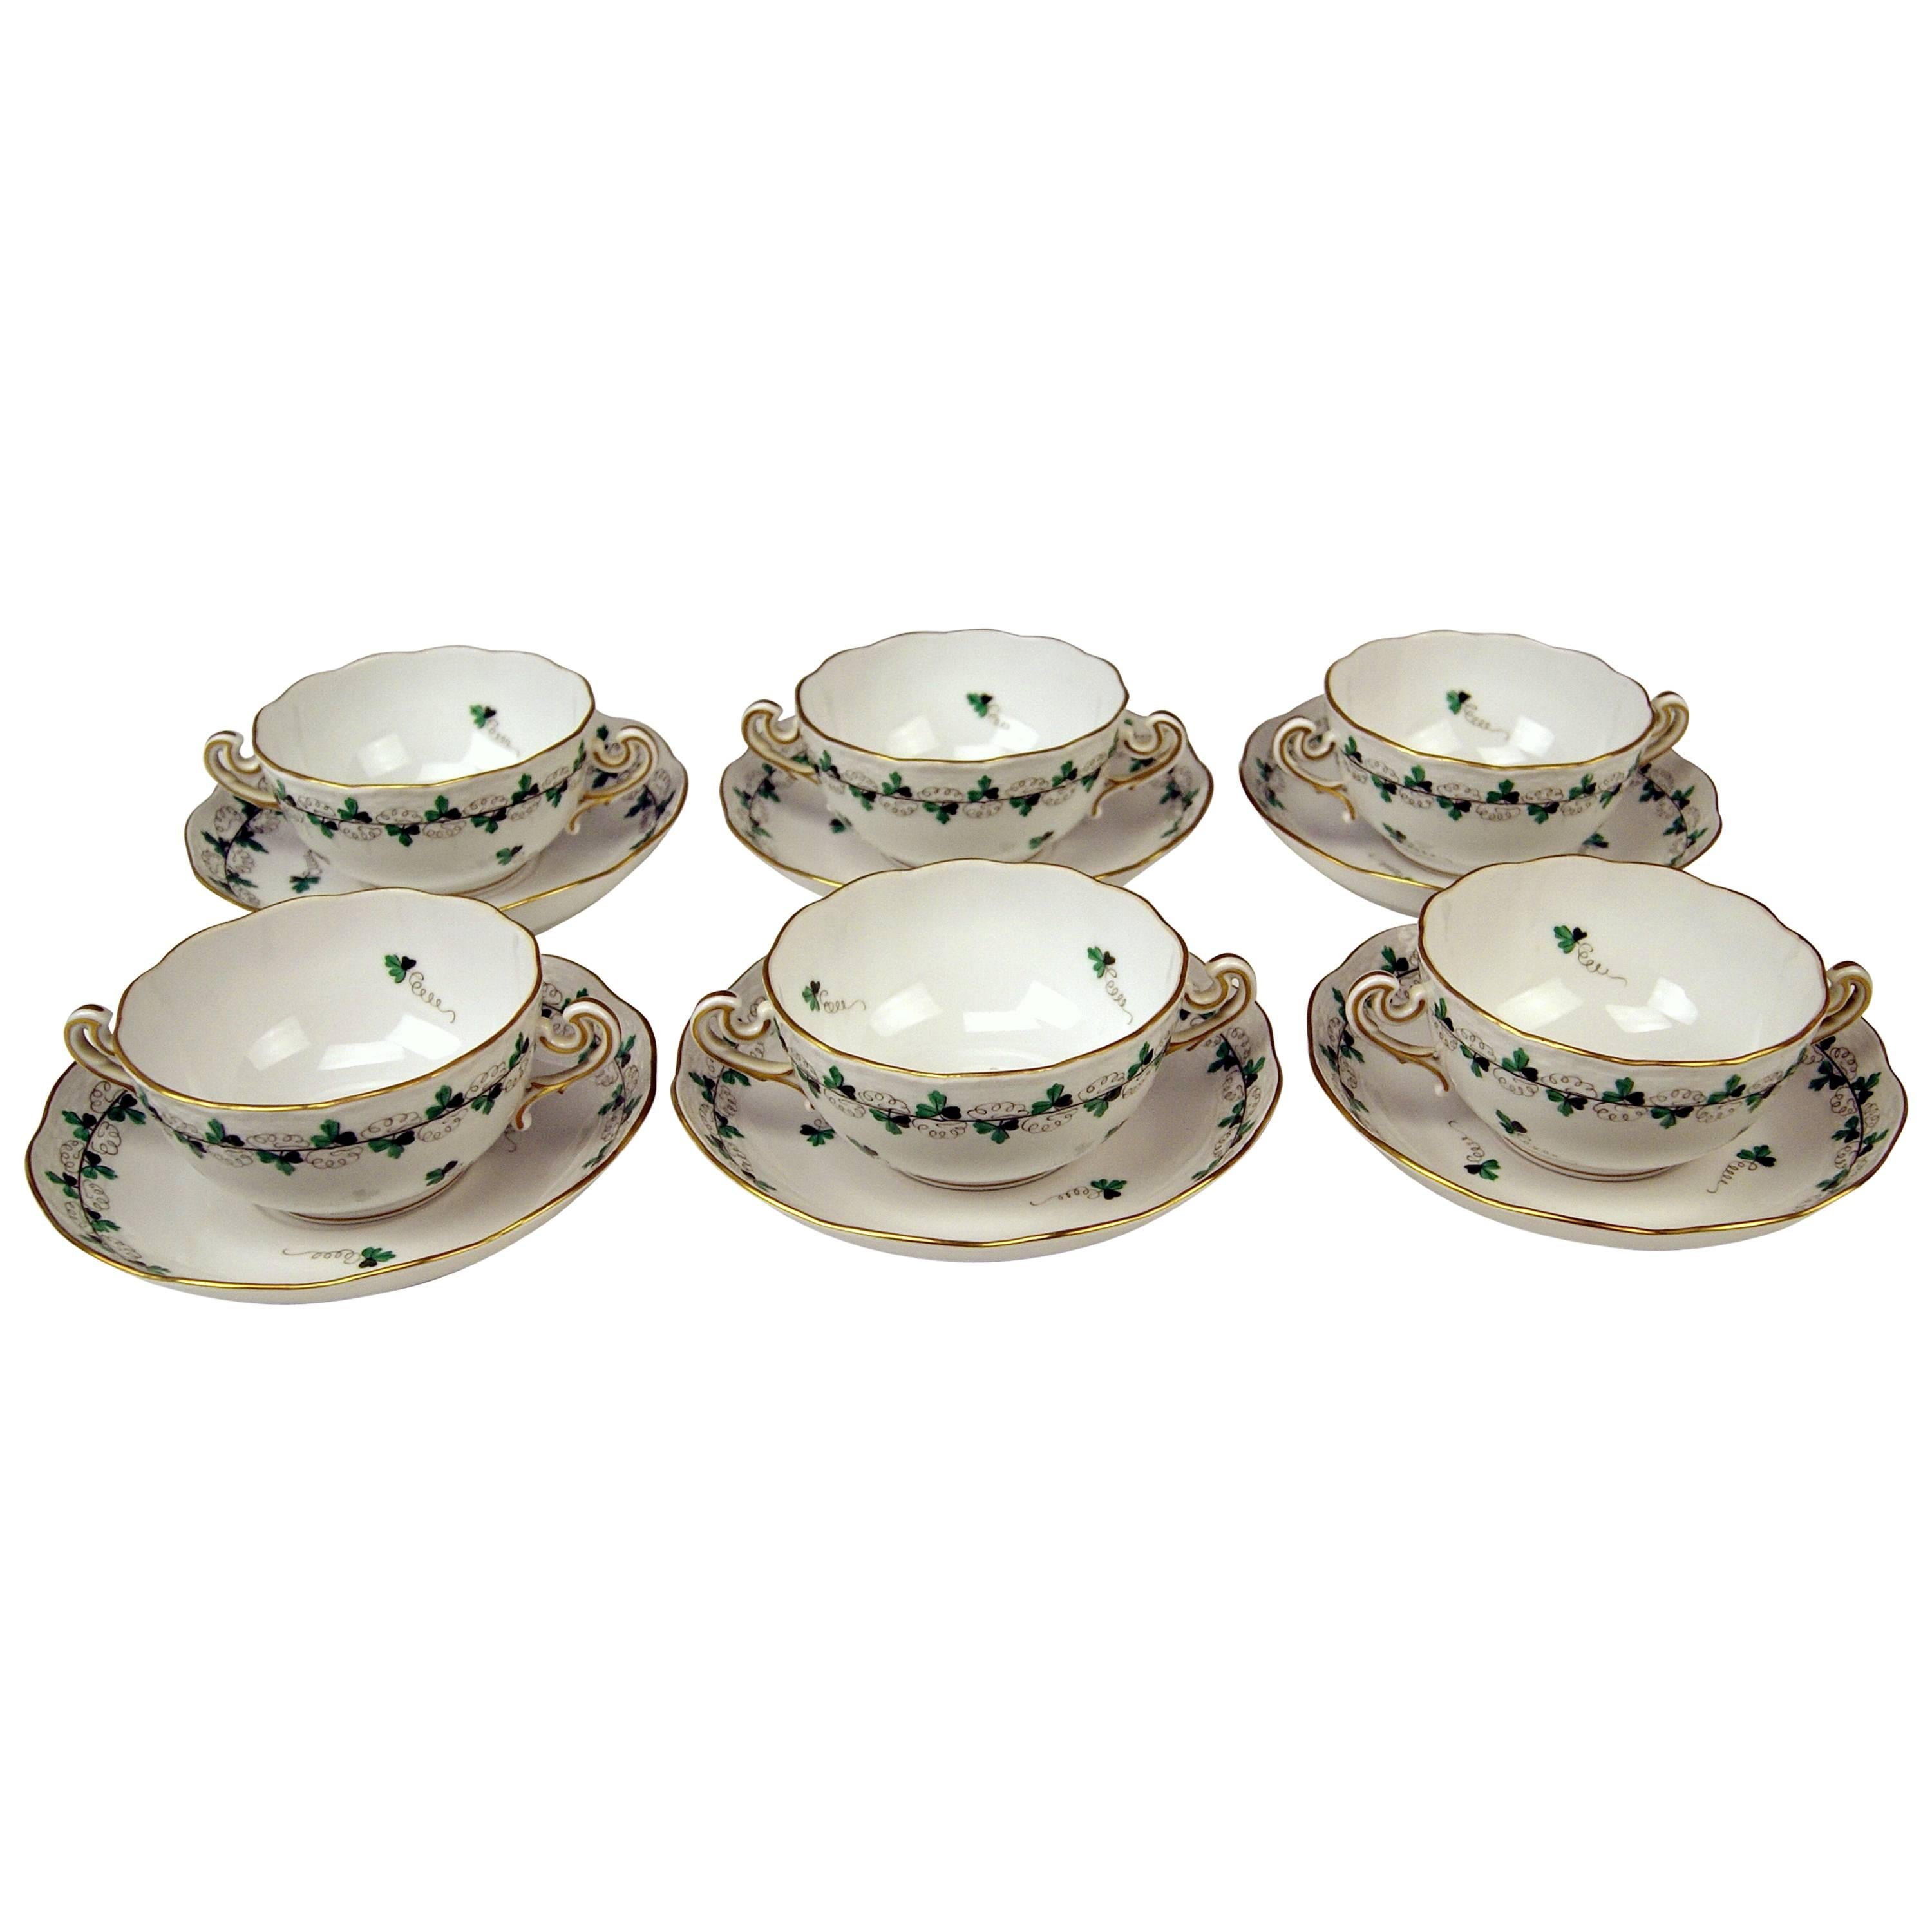 Herend Soup Bowls for Six Persons Decor Persil, circa 1960